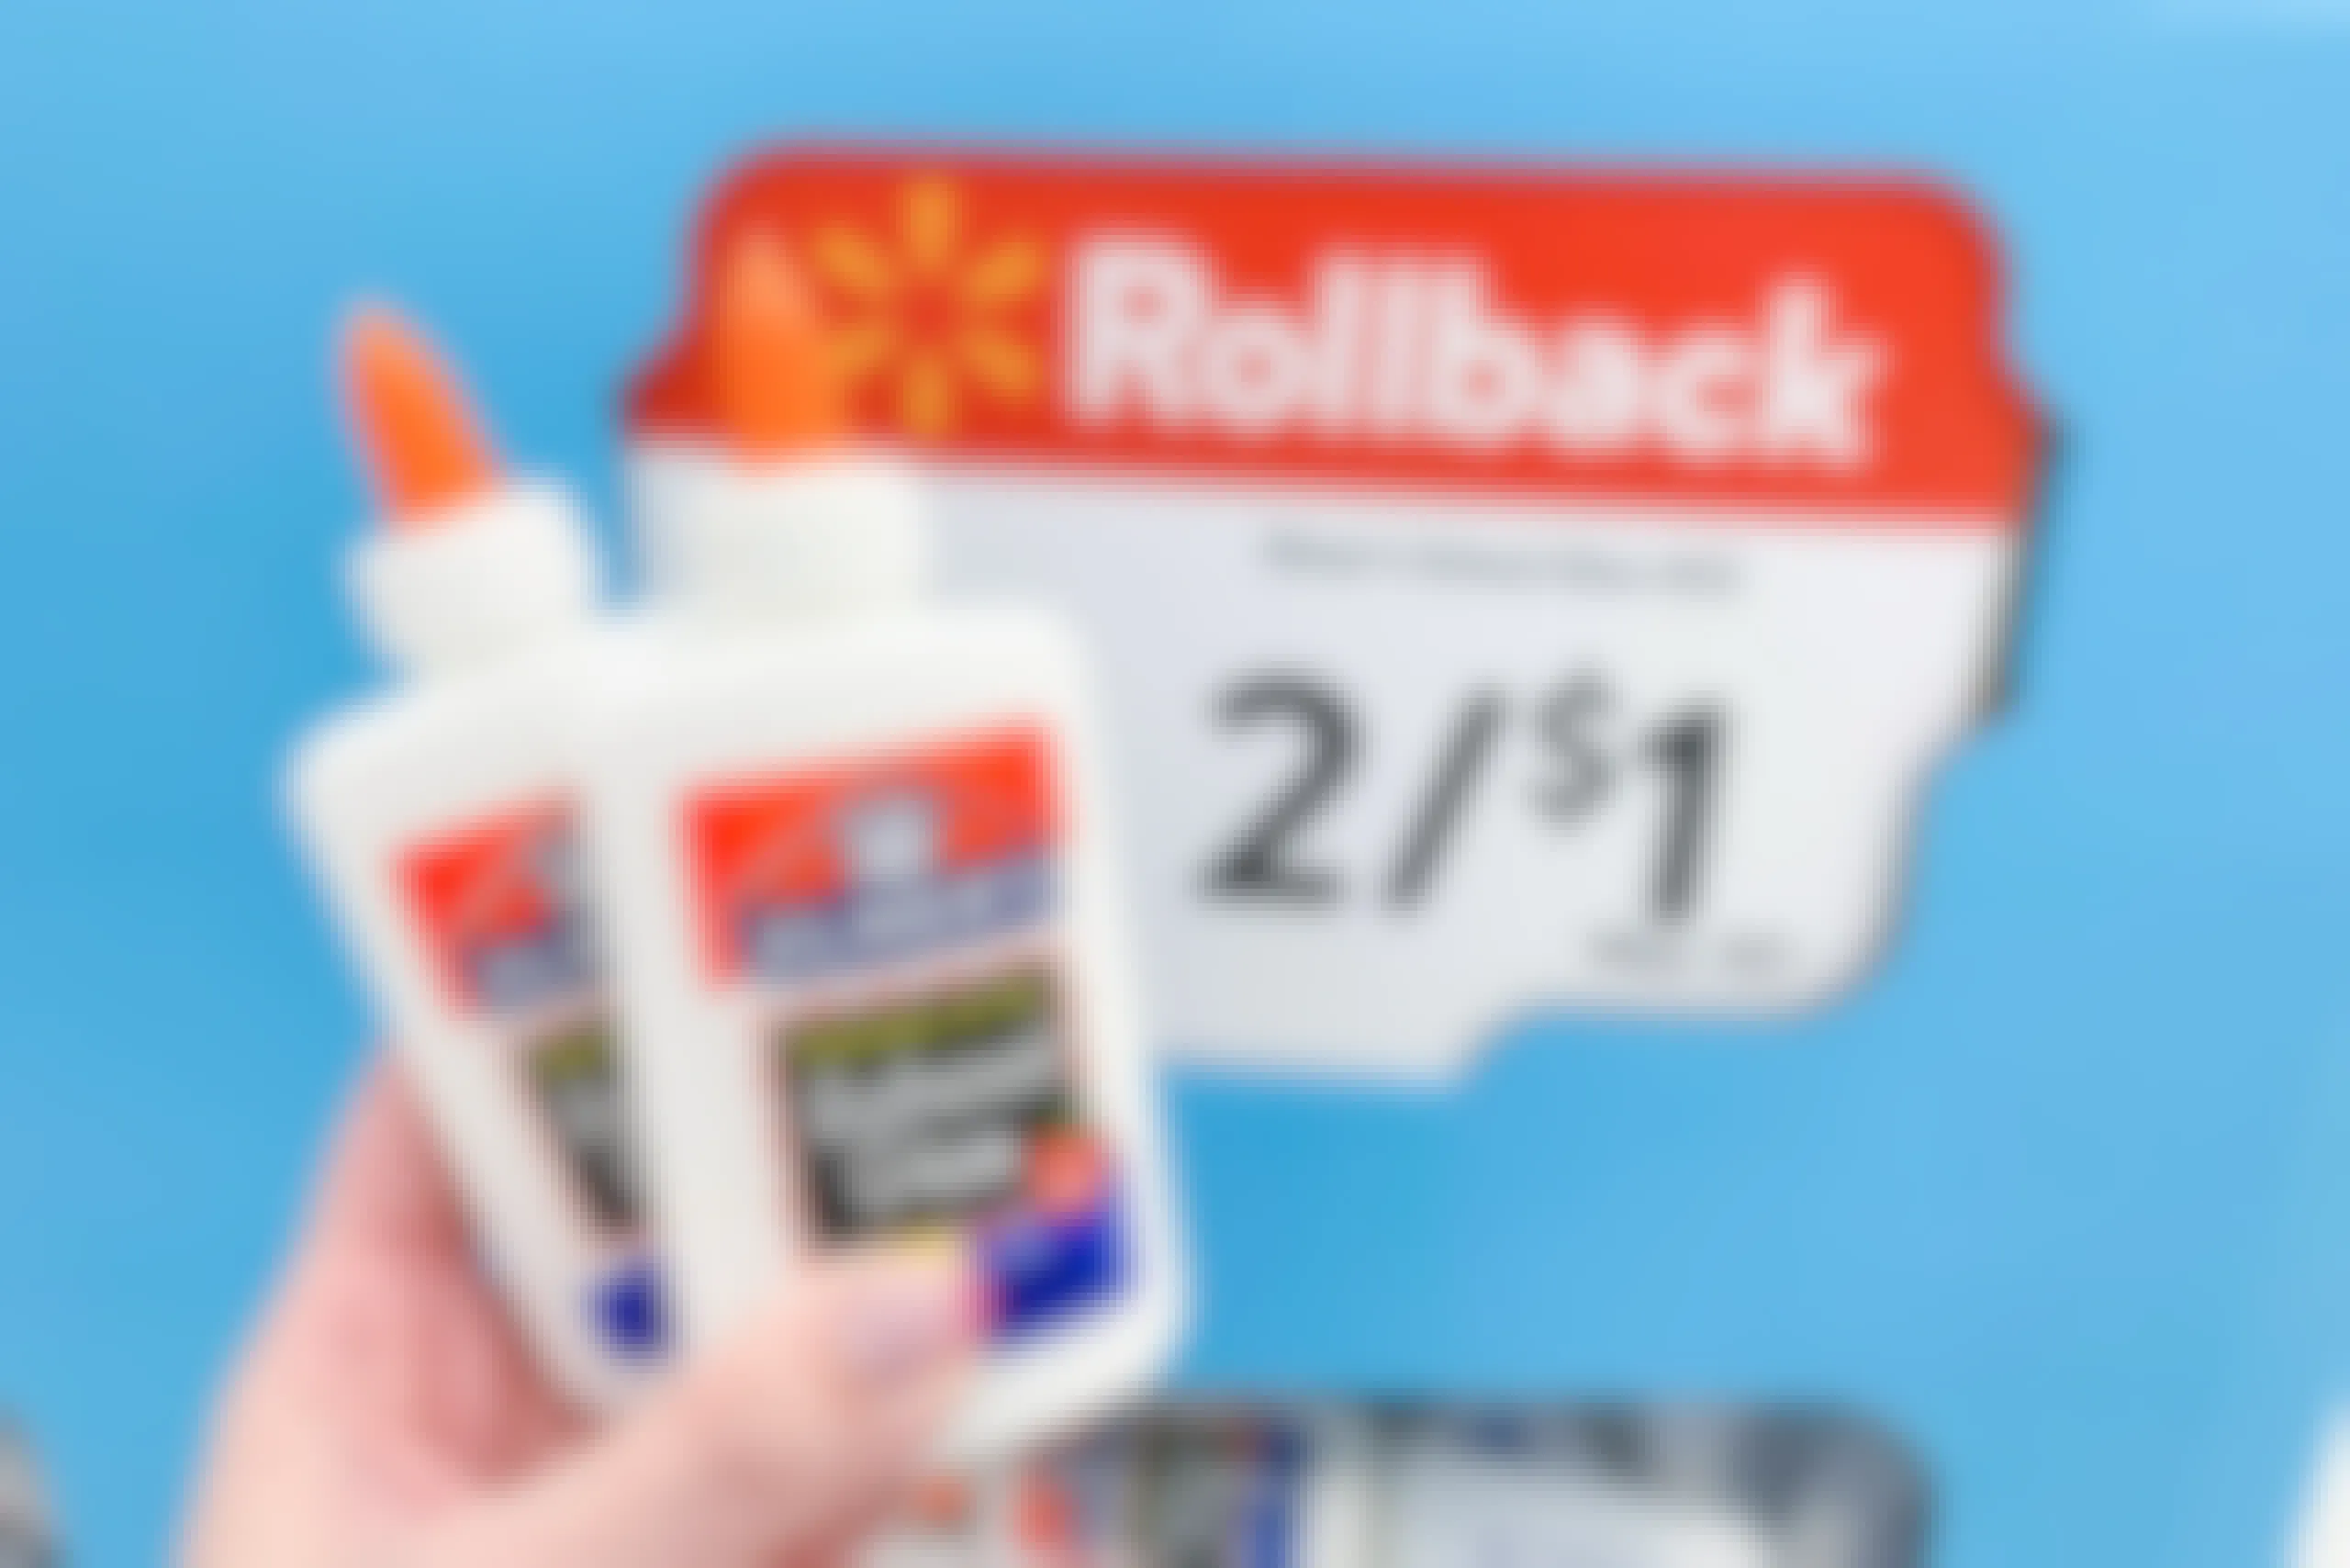 A person's hand holding 2 bottles of Elmer's School Glue in front of a Walmart Rollback sale sign that reads, "Elmer's school glue 4oz, 2/$1" inside Walmart.